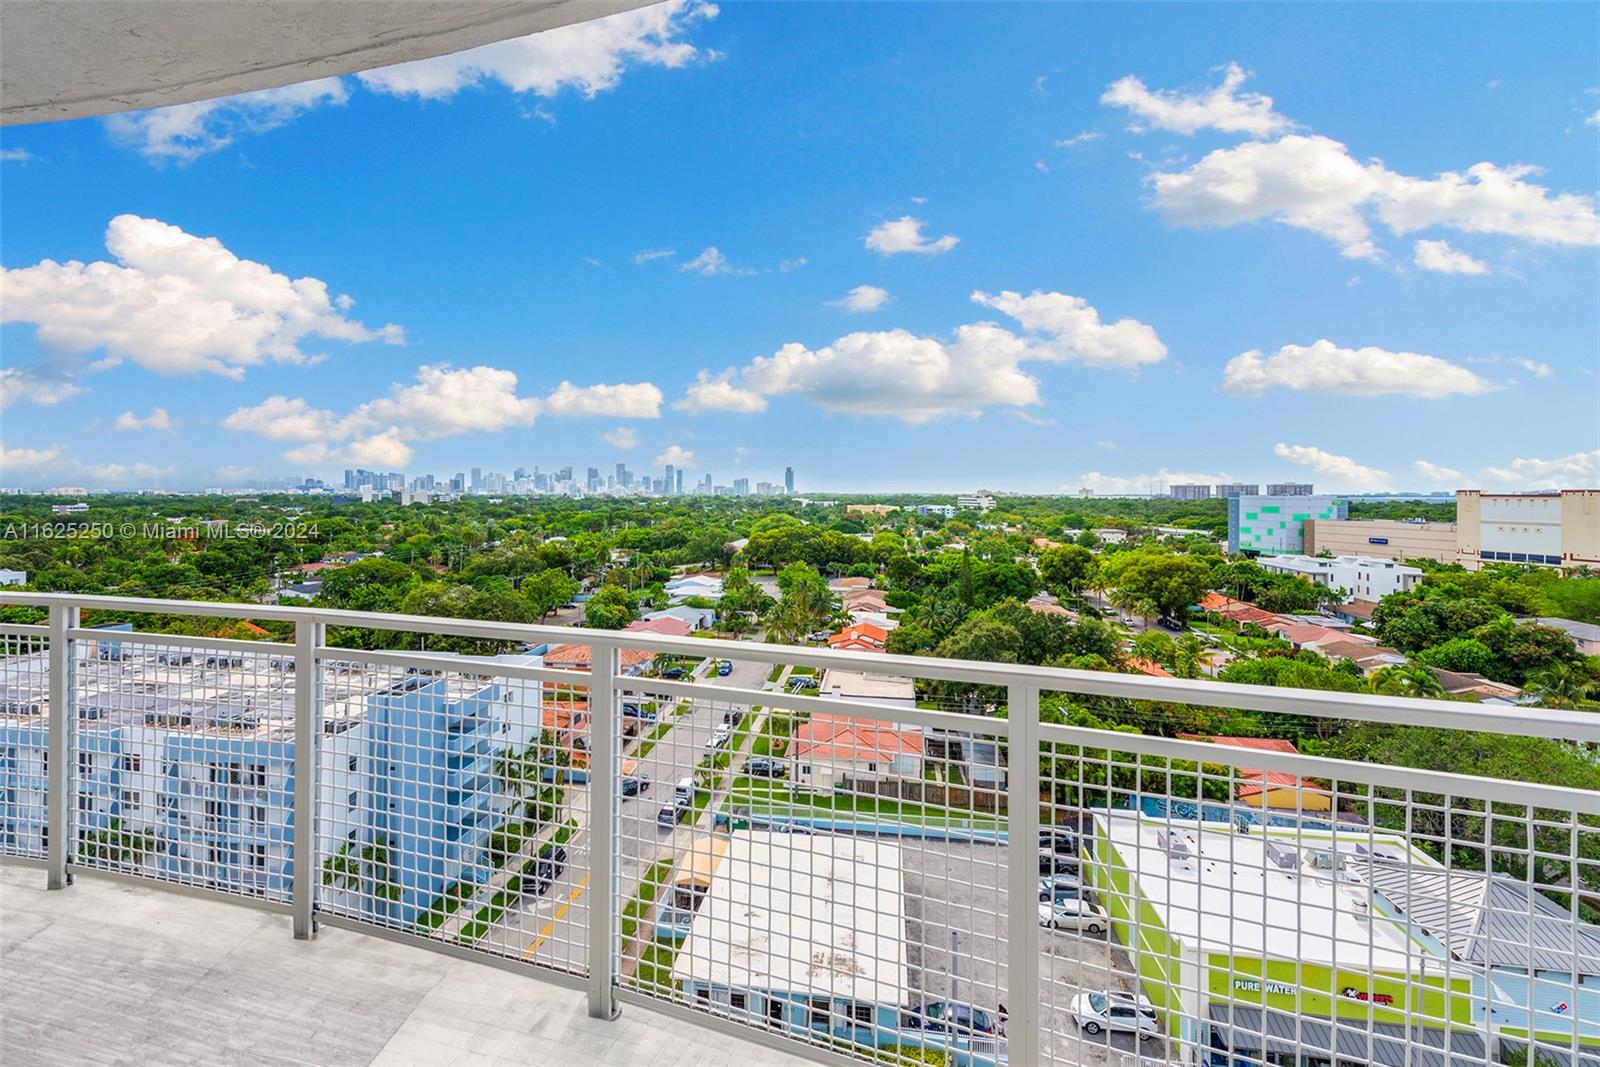 Stunning Miami skyline and ocean views from this 2 bed / 2 bath penthouse with oversized balcony and high ceilings throughout. Enjoy the Coconut Grove lifestyle atop this boutique condominium, Gateway to the Grove. With a comfortable split floorplan and open kitchen, this penthouse is now rarely available and move-in ready. Ideally located 2 blocks from the brand-new Grove Central Shops, which include Target, Sprouts Farmers Market, Total Wine, Five Below, Chipotle, Panera Bread, the famous luxury gym Club Studio and more. Residents will also appreciate easy walking access to Metrorail and the new Underline linear park. Gateway to the Grove amenities include a gym, social area, dog-friendly spaces, and an indoor heated pool. Two deeded parking spaces ensure convenience for you and guests.